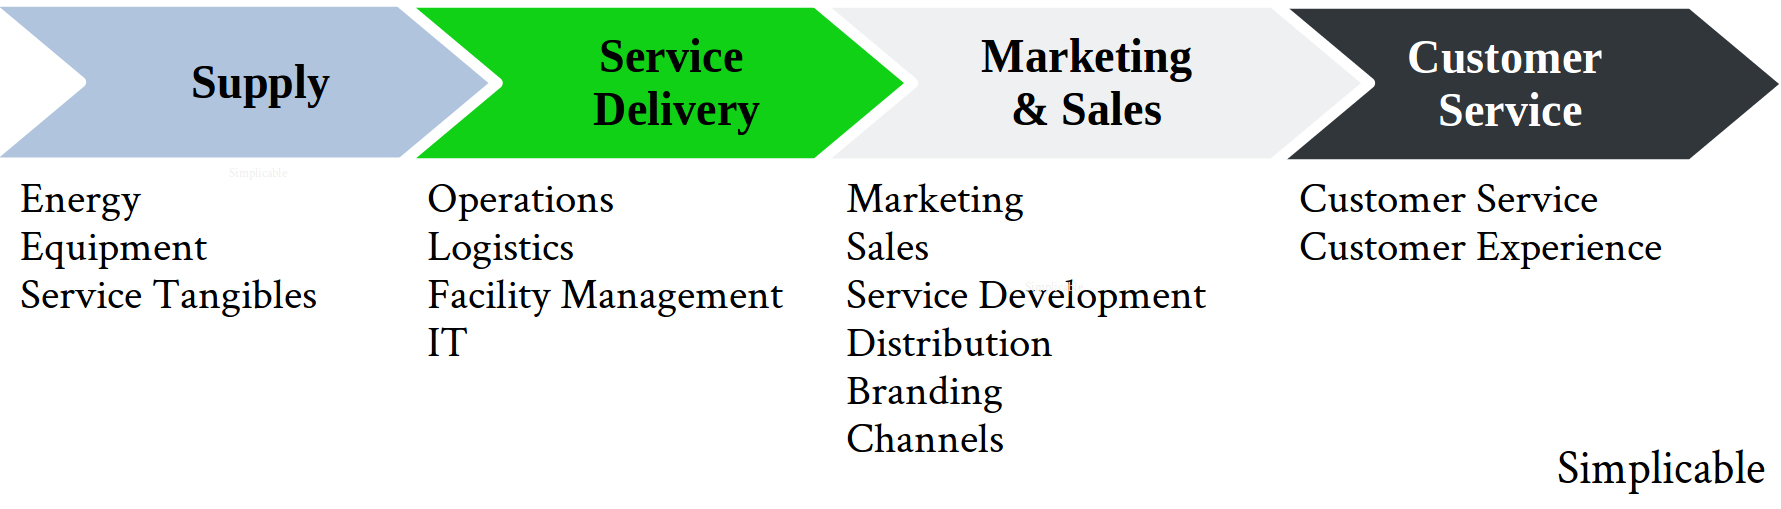 service value chain supply to service